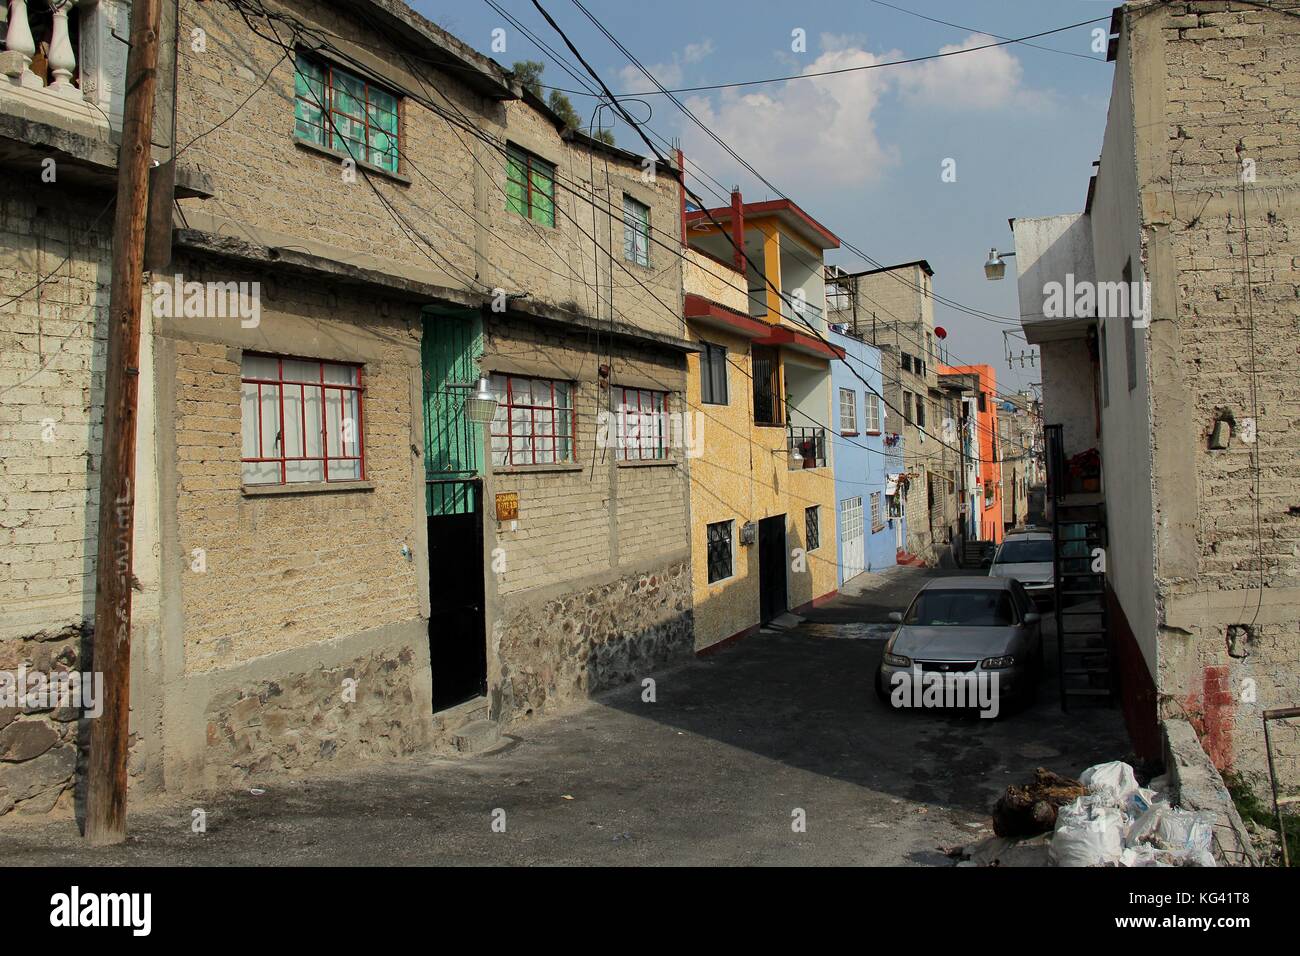 Mexican Slums High Resolution Stock Photography And Images Alamy